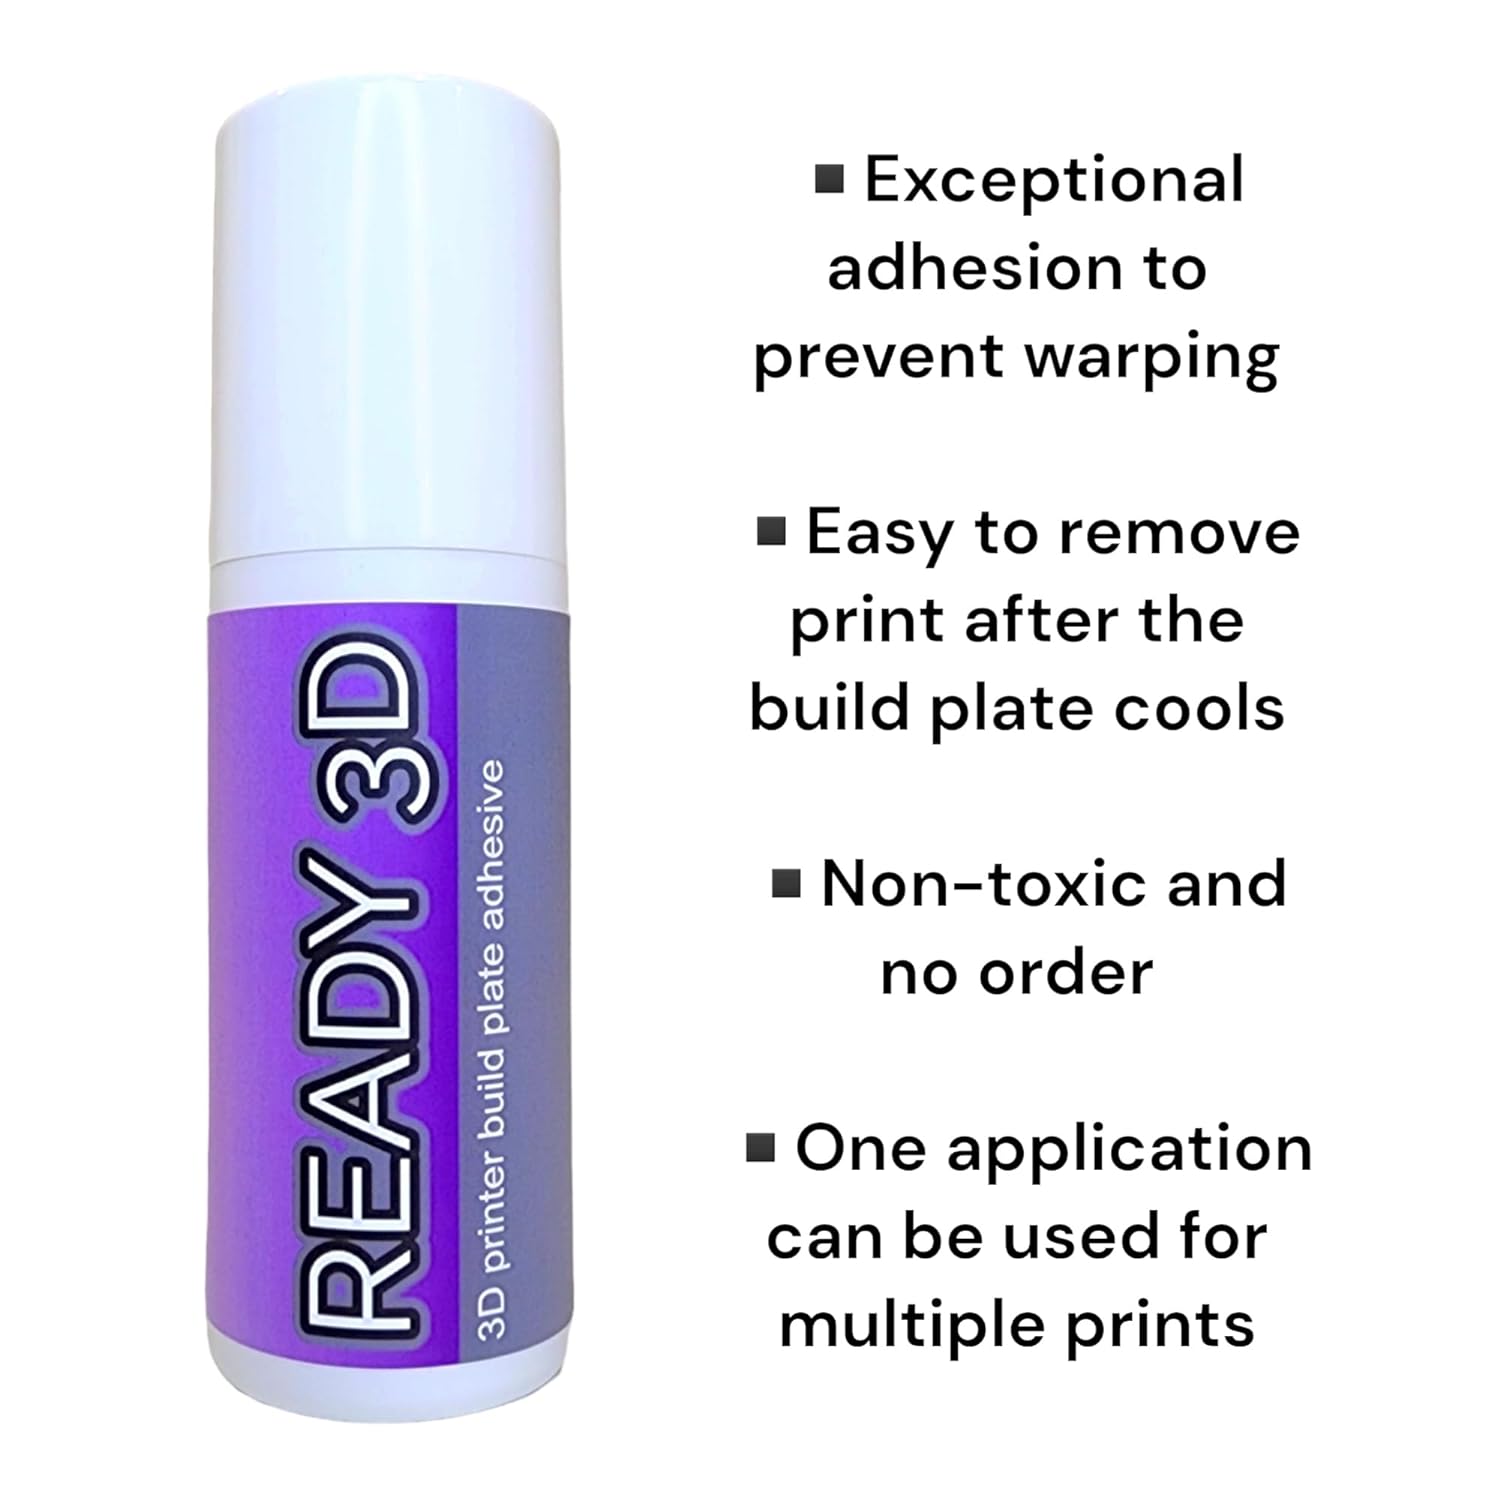 ready-3d-printer-build-plate-adhesive-and-build-plate-cleaner-excellent-hold-easy-release-non-toxic-and-odorless-2 Ready 3D Printer Build Plate Adhesive Review